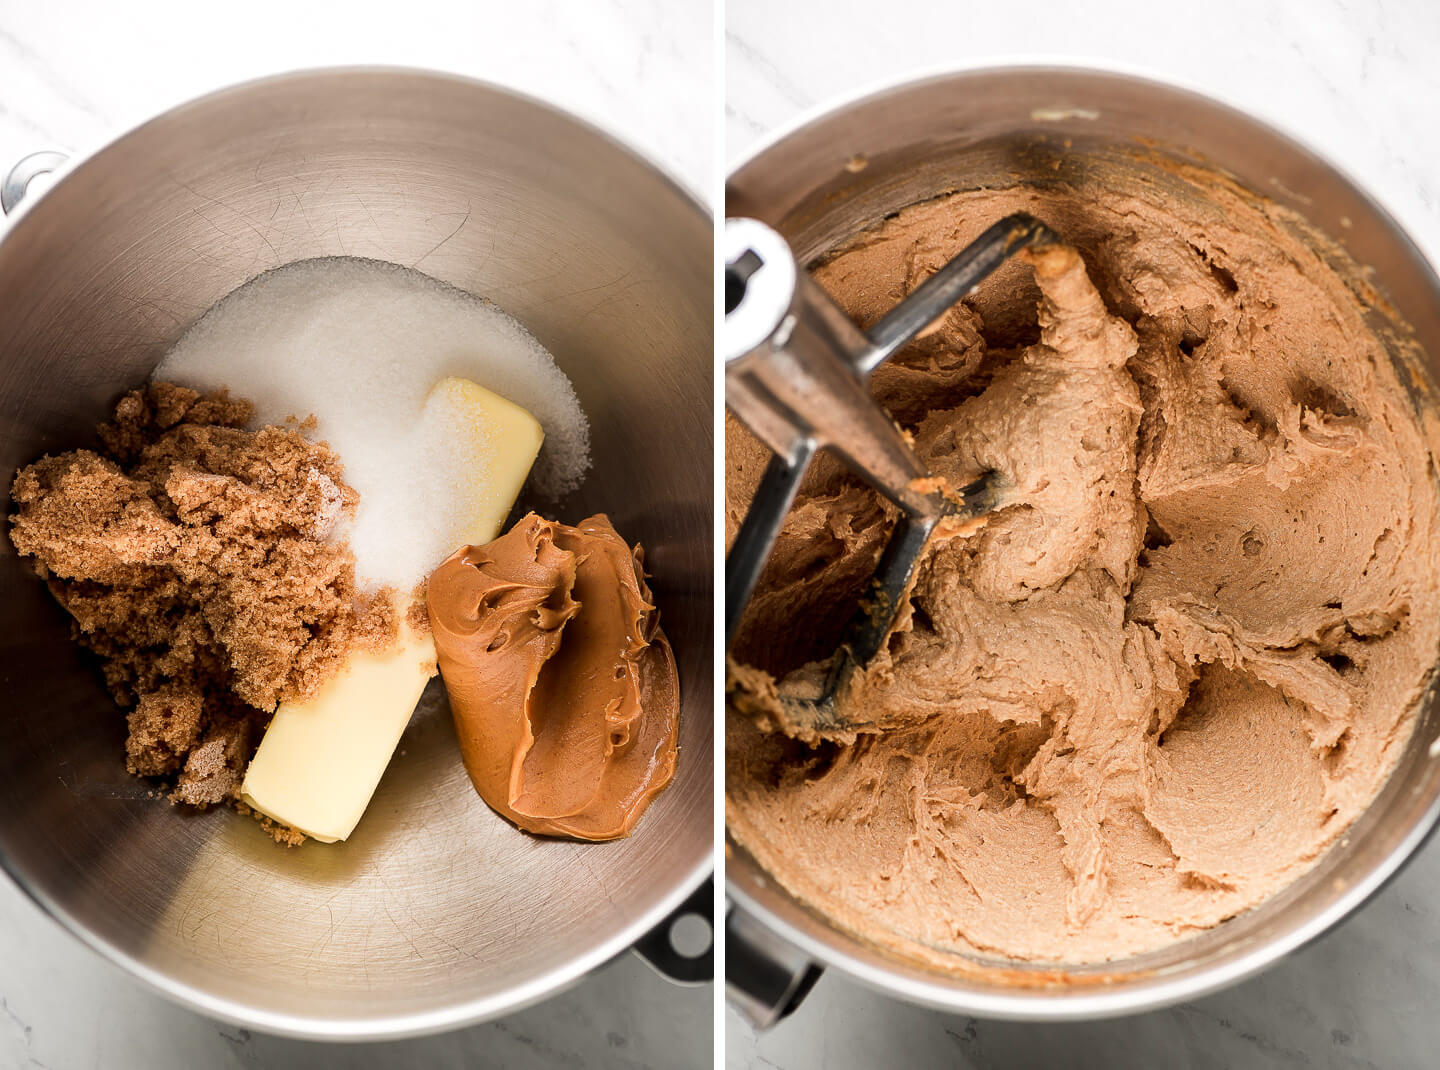 Butter, sugar, and peanut butter in a metal mixing bowl; creamed butter, sugar, and peanut butter.